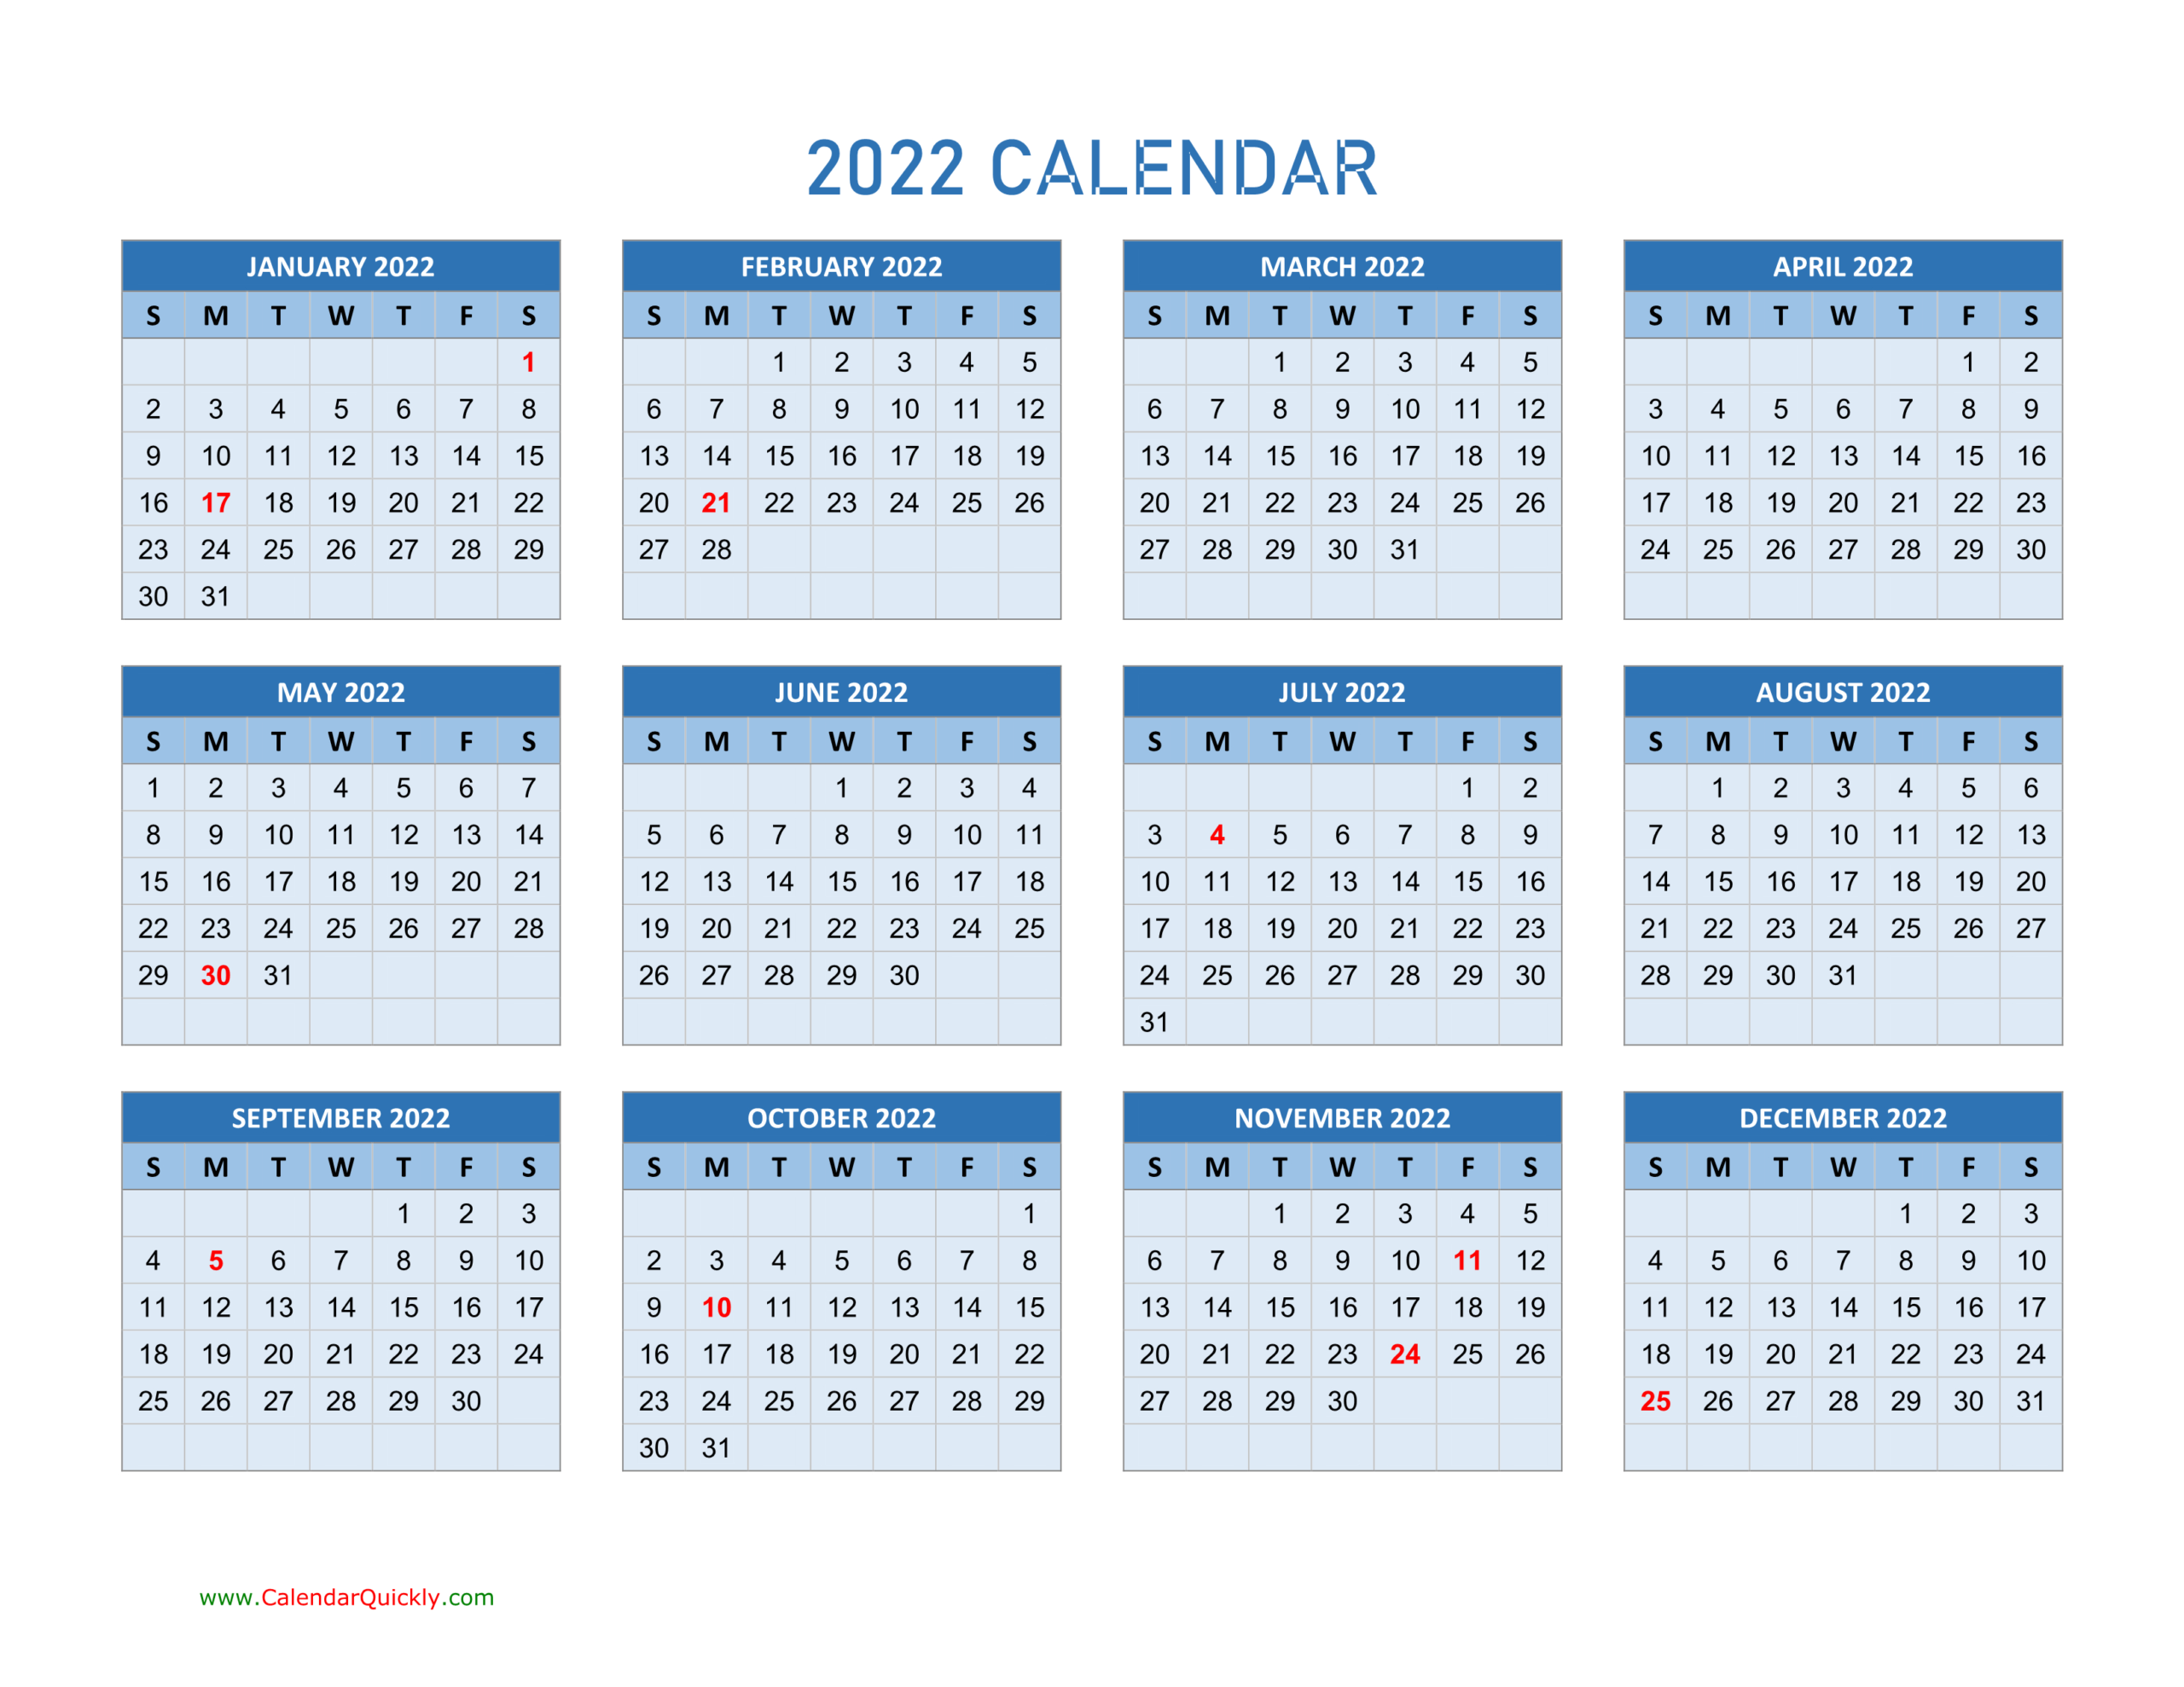 Year 2022 Calendars | Calendar Quickly-2022 Yearly Calendar Printable One Page